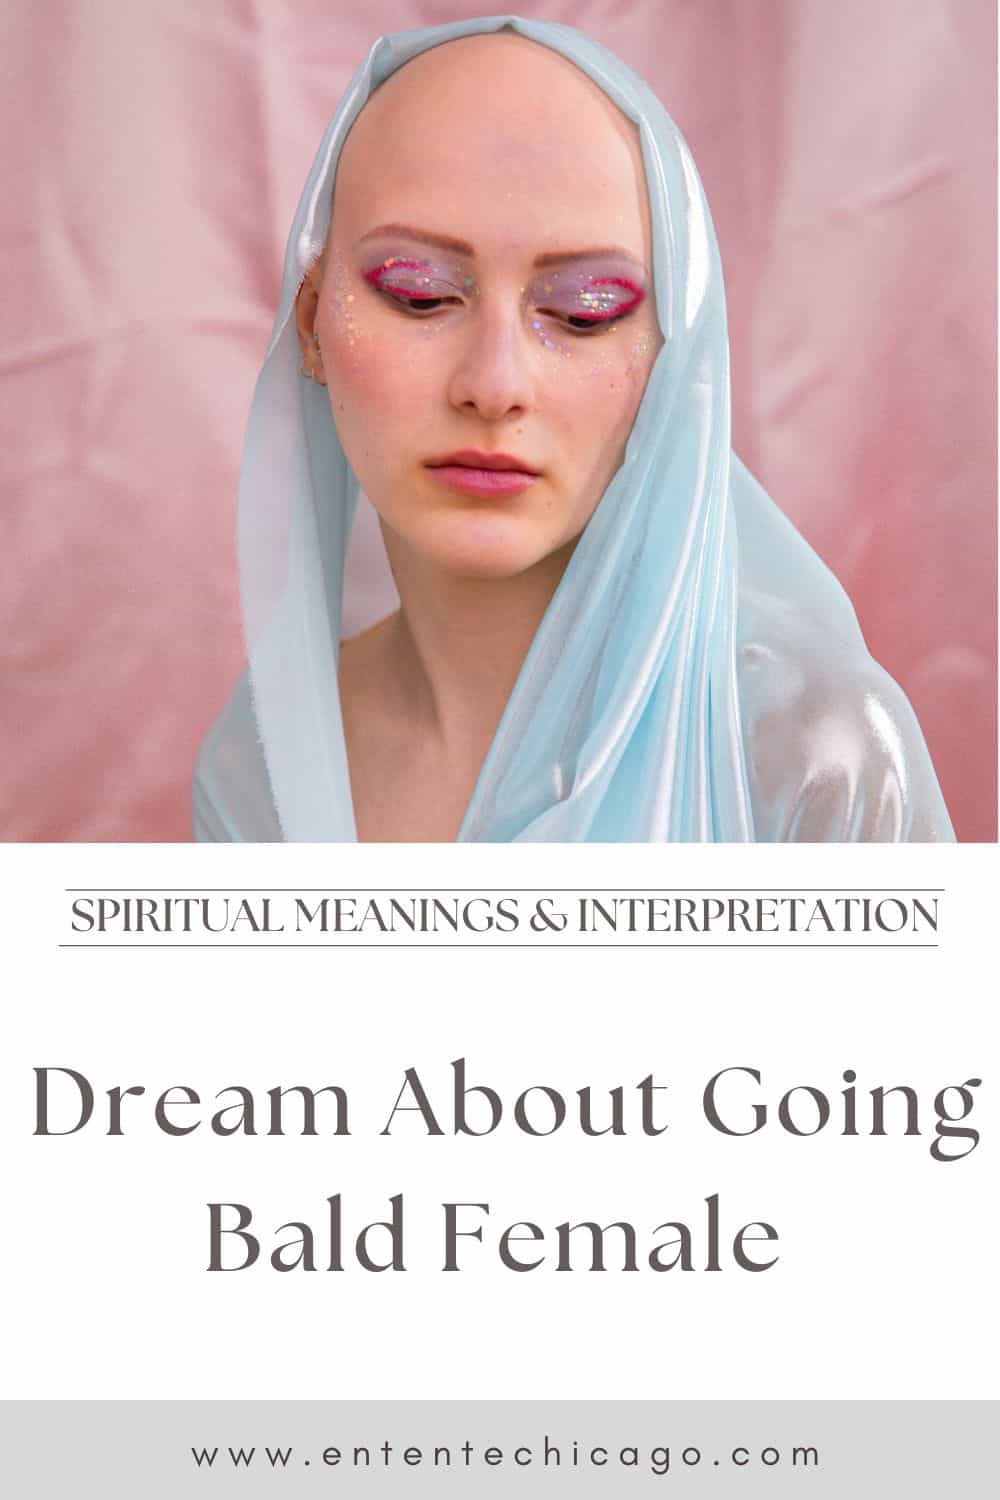 Dream About Going Bald Female